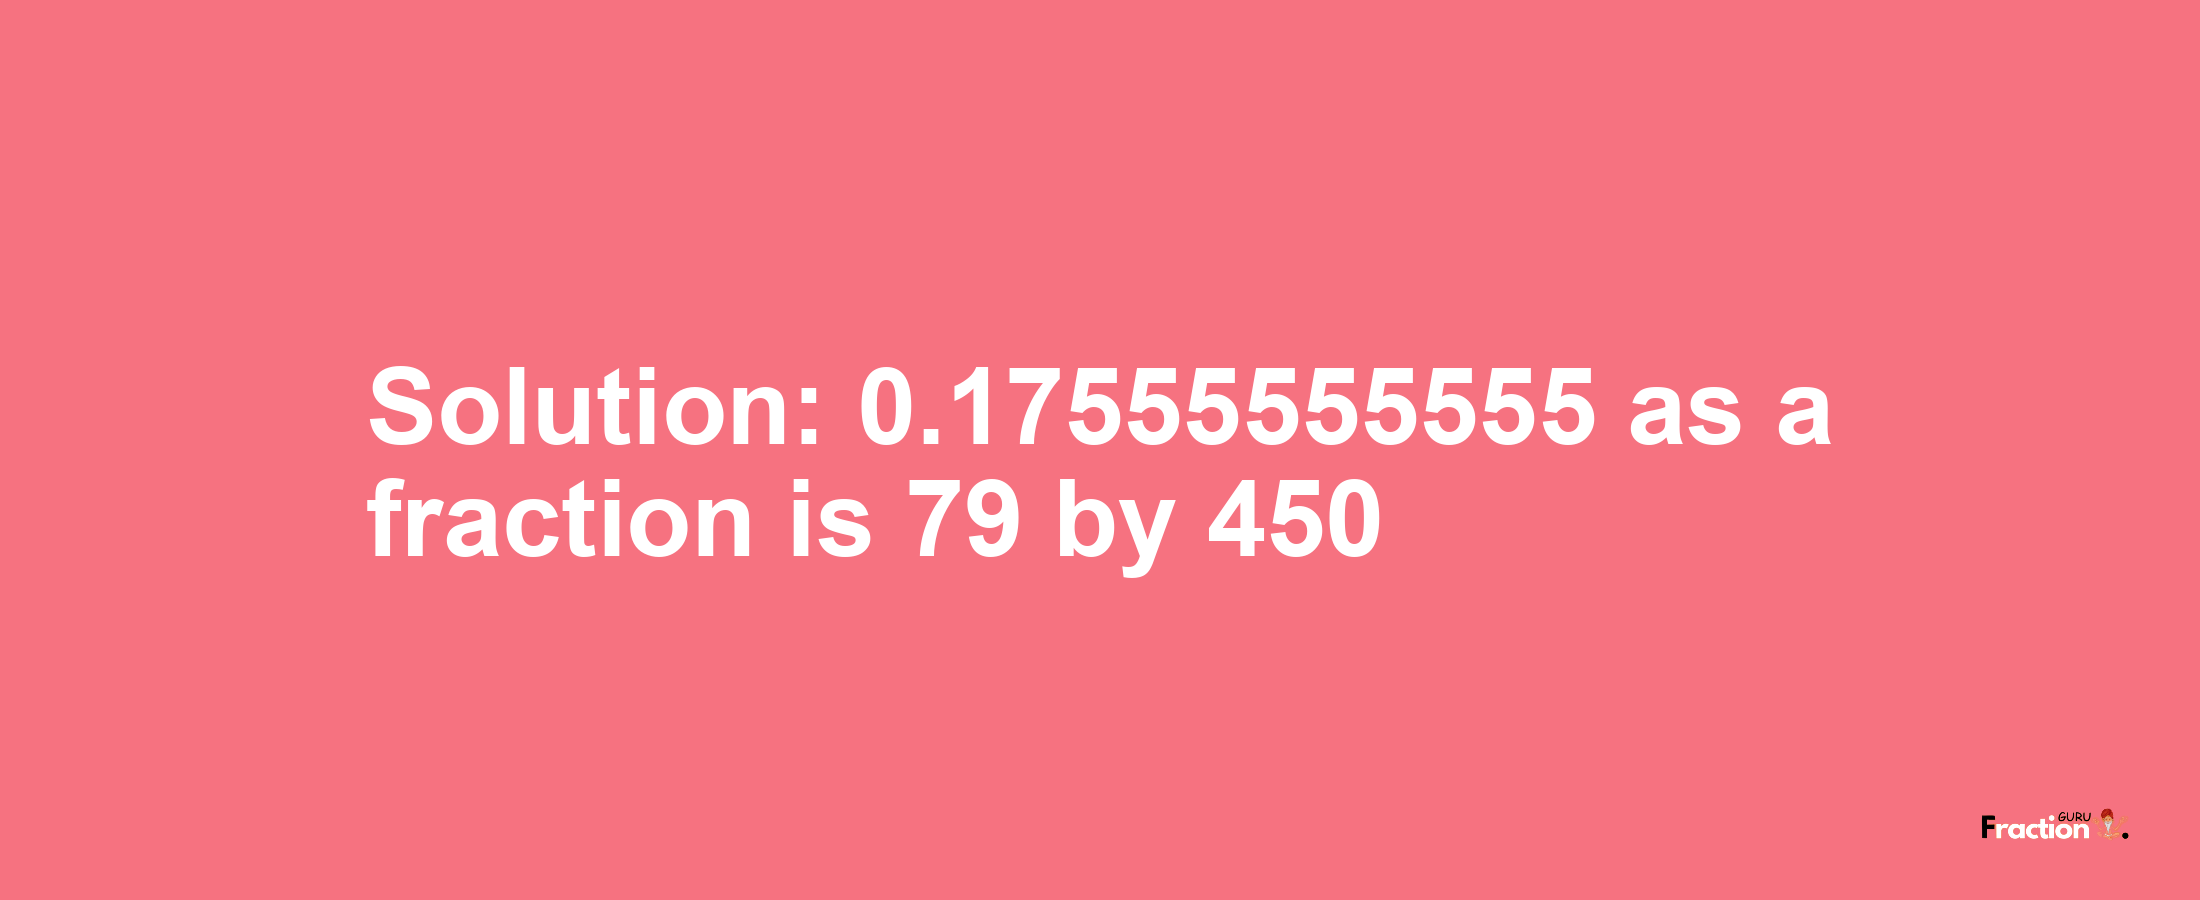 Solution:0.17555555555 as a fraction is 79/450